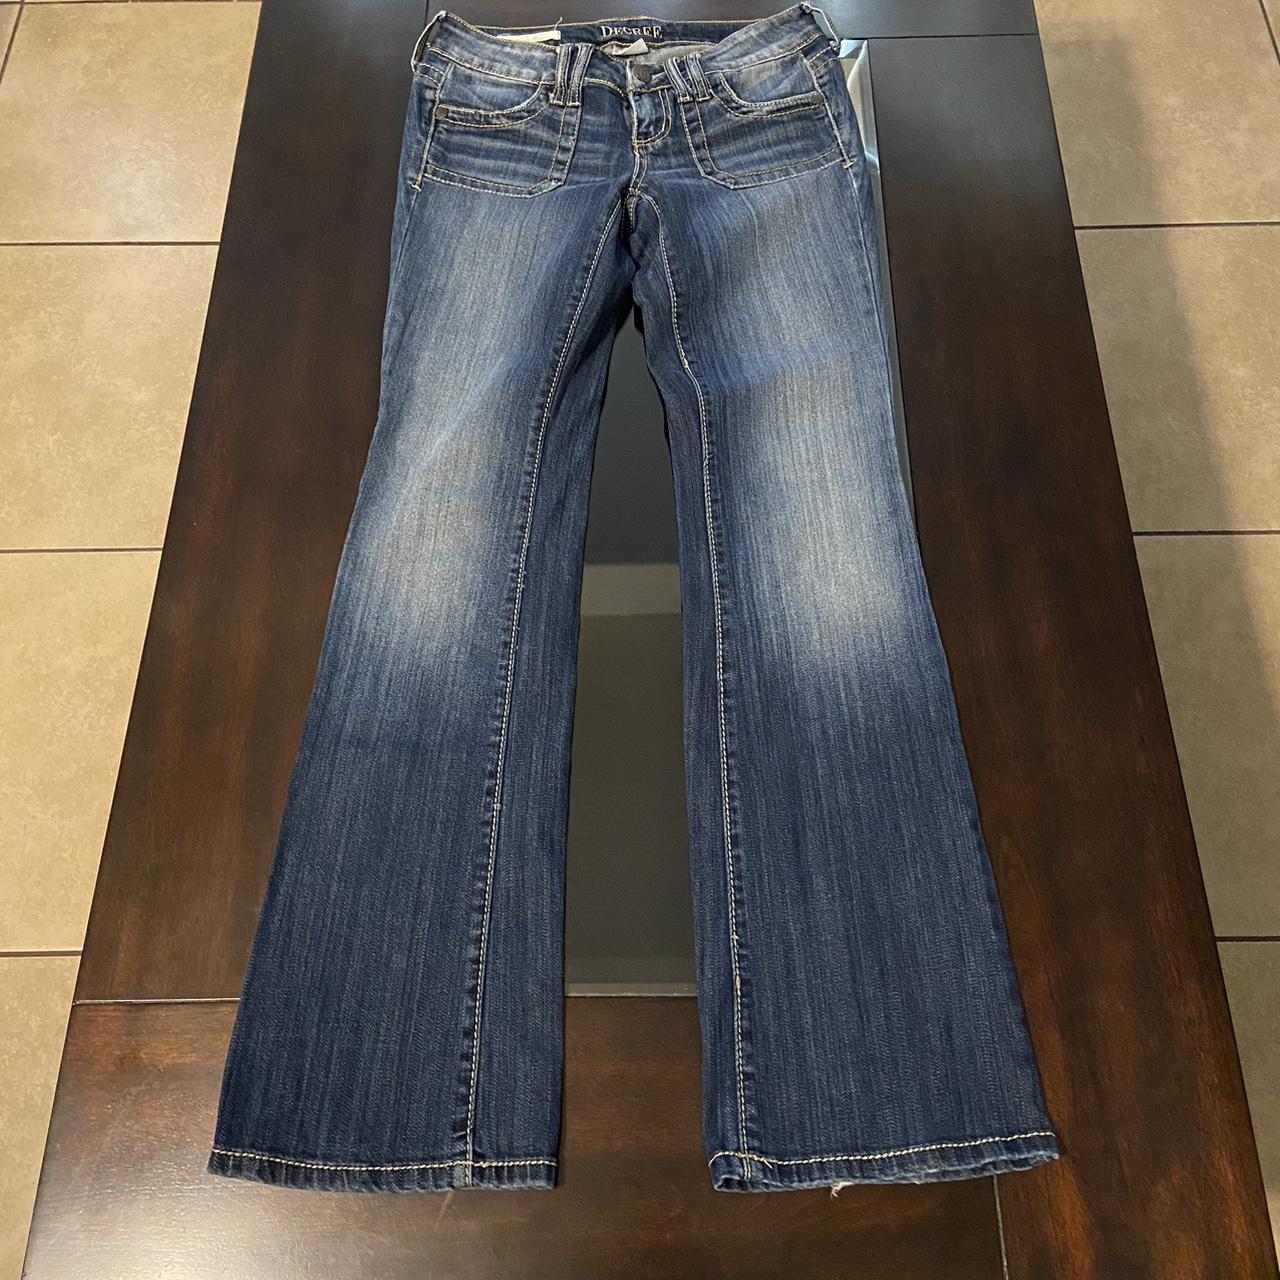 Early 2000’s low rise boot cut jeans by DECREE no... - Depop